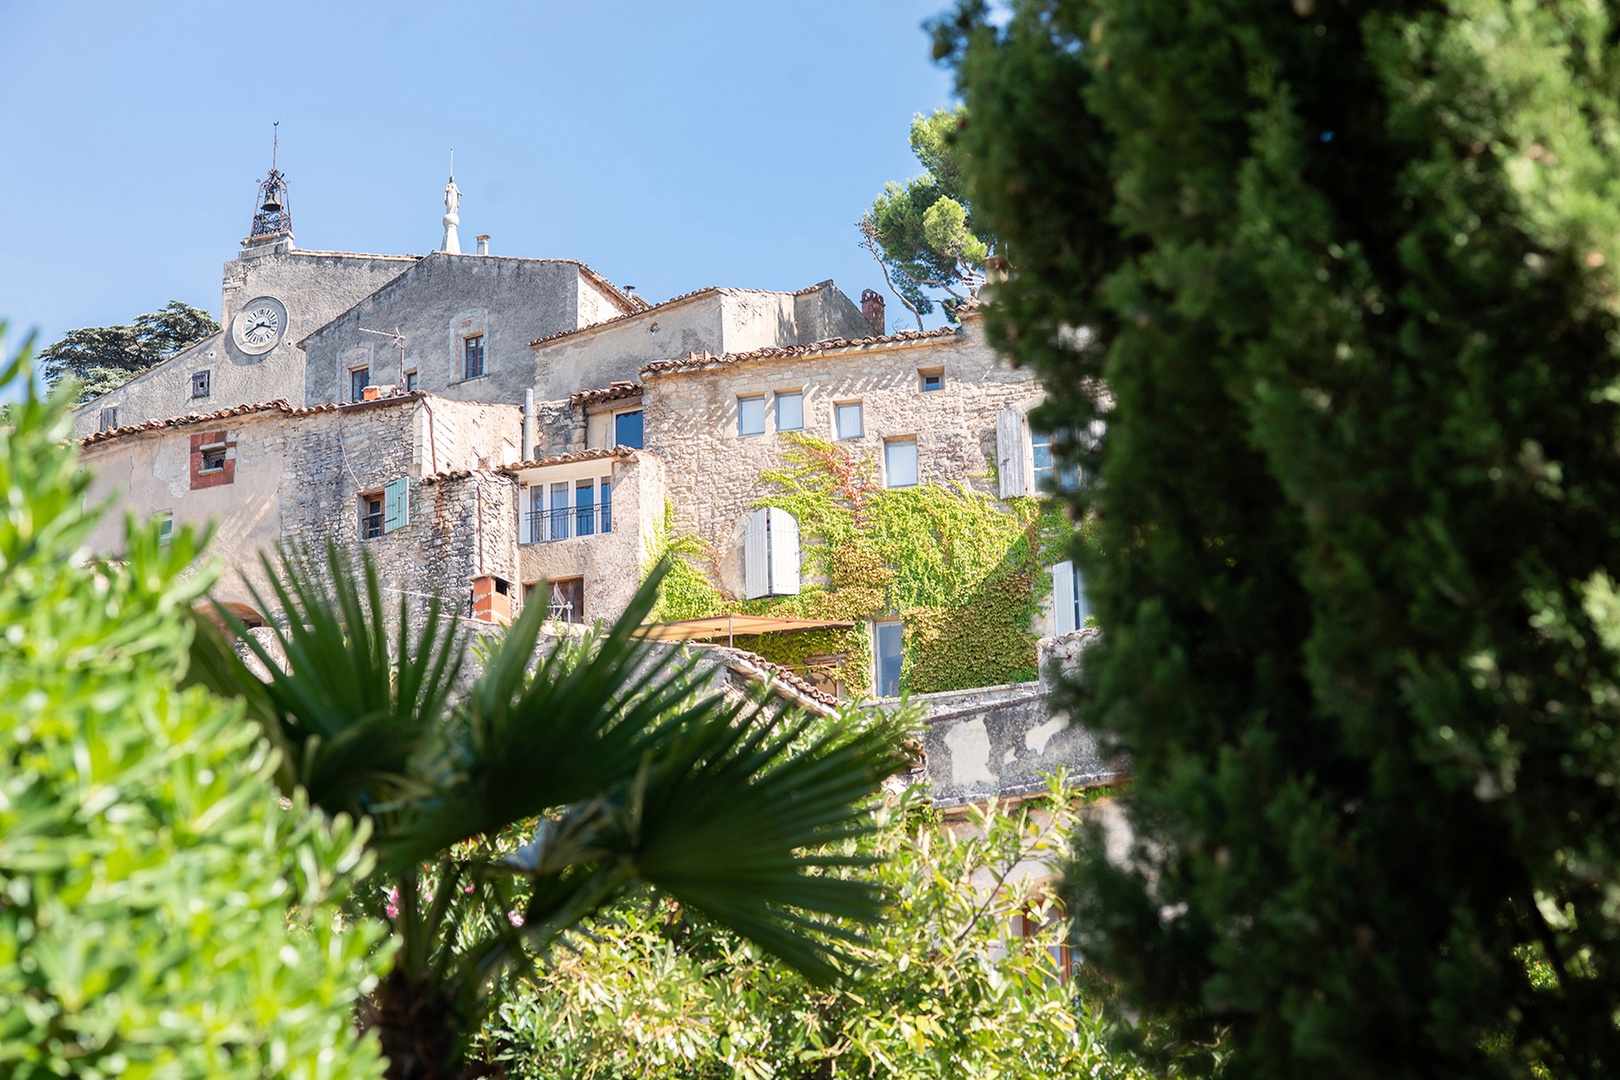 Fall in love with the utterly charming village of Bonnieux.